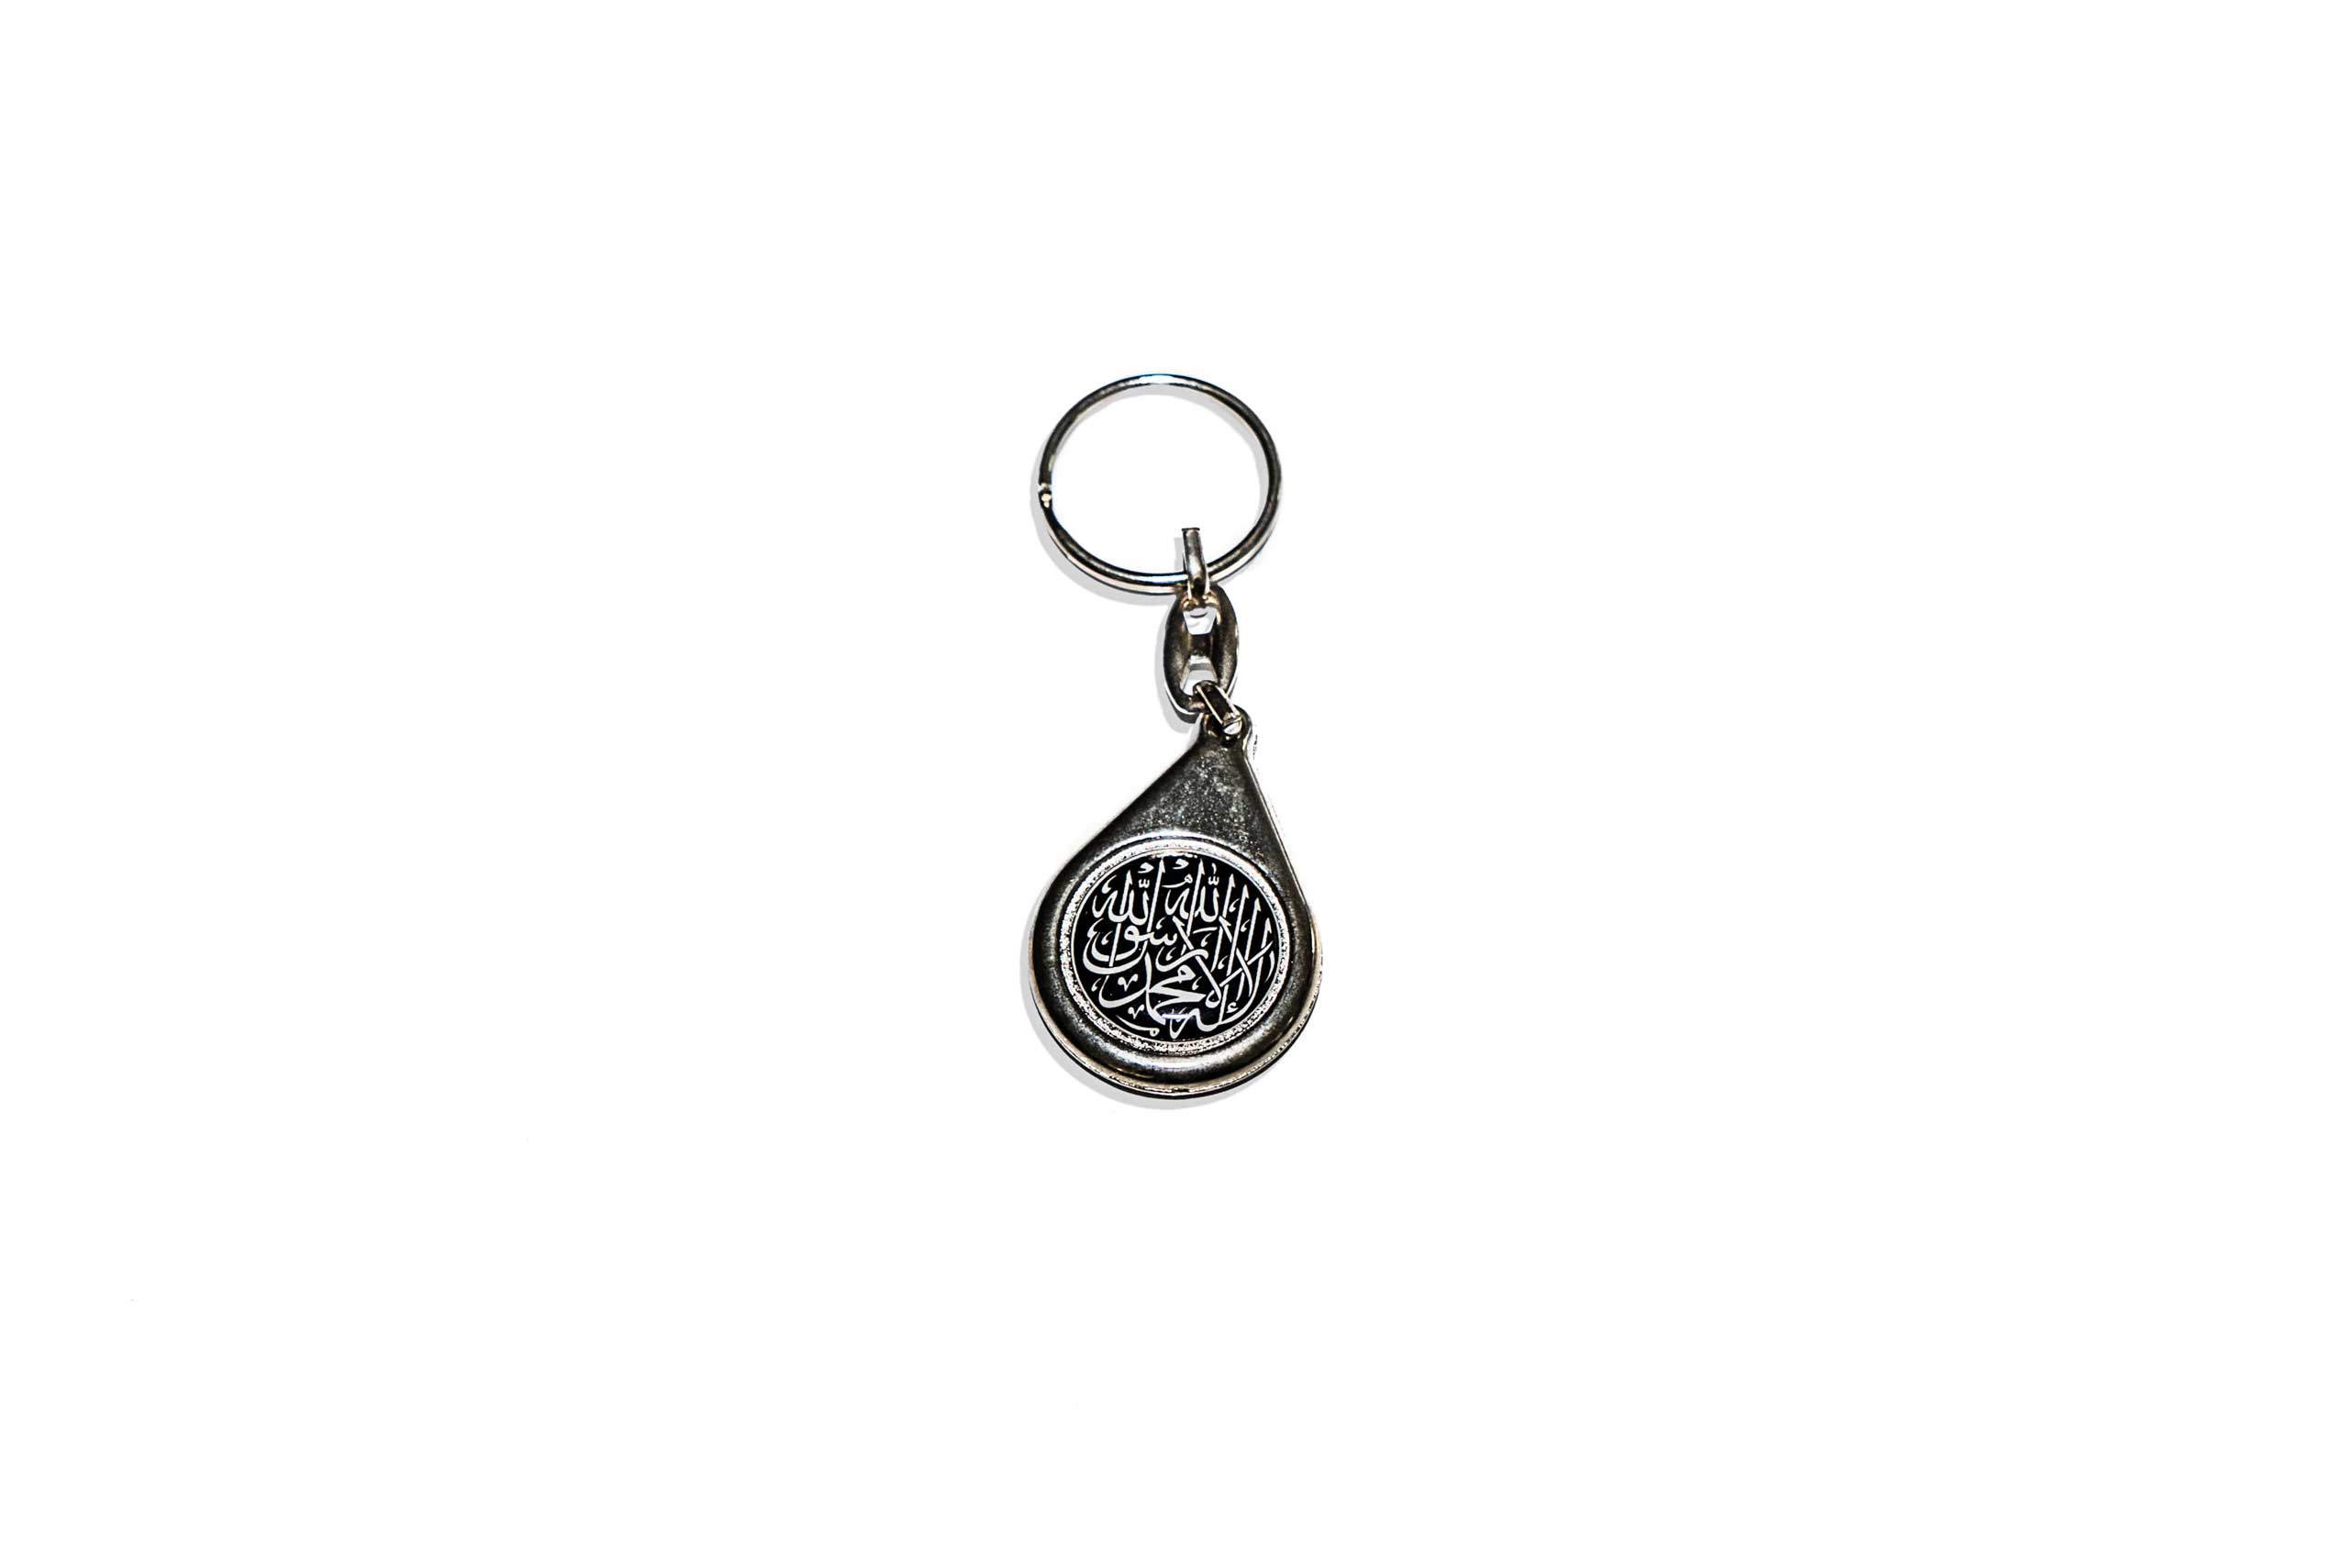 Jihad keyring, found in a Islamic clothing and accessory shop in the Bagcilar district of Istanbul, Turkey.